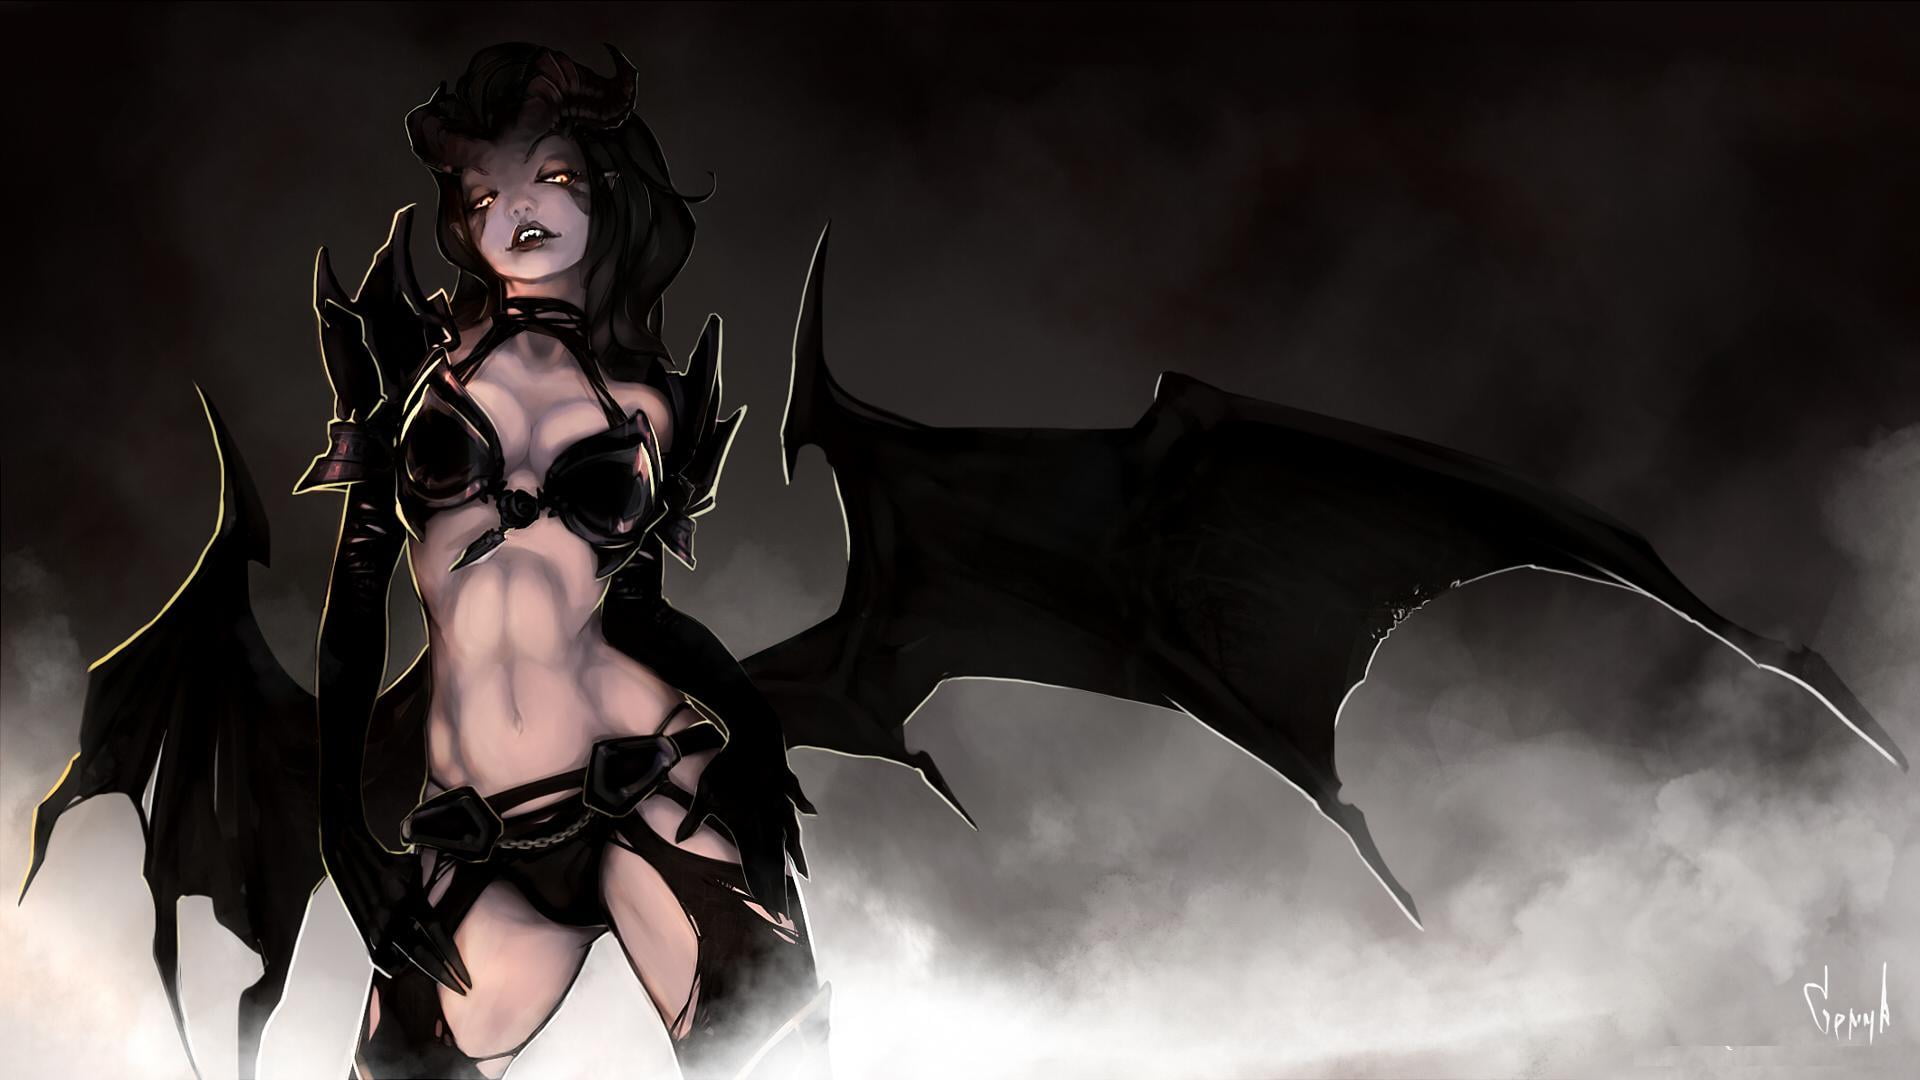 female game character, look, wings, art, horns, demoness, succubus